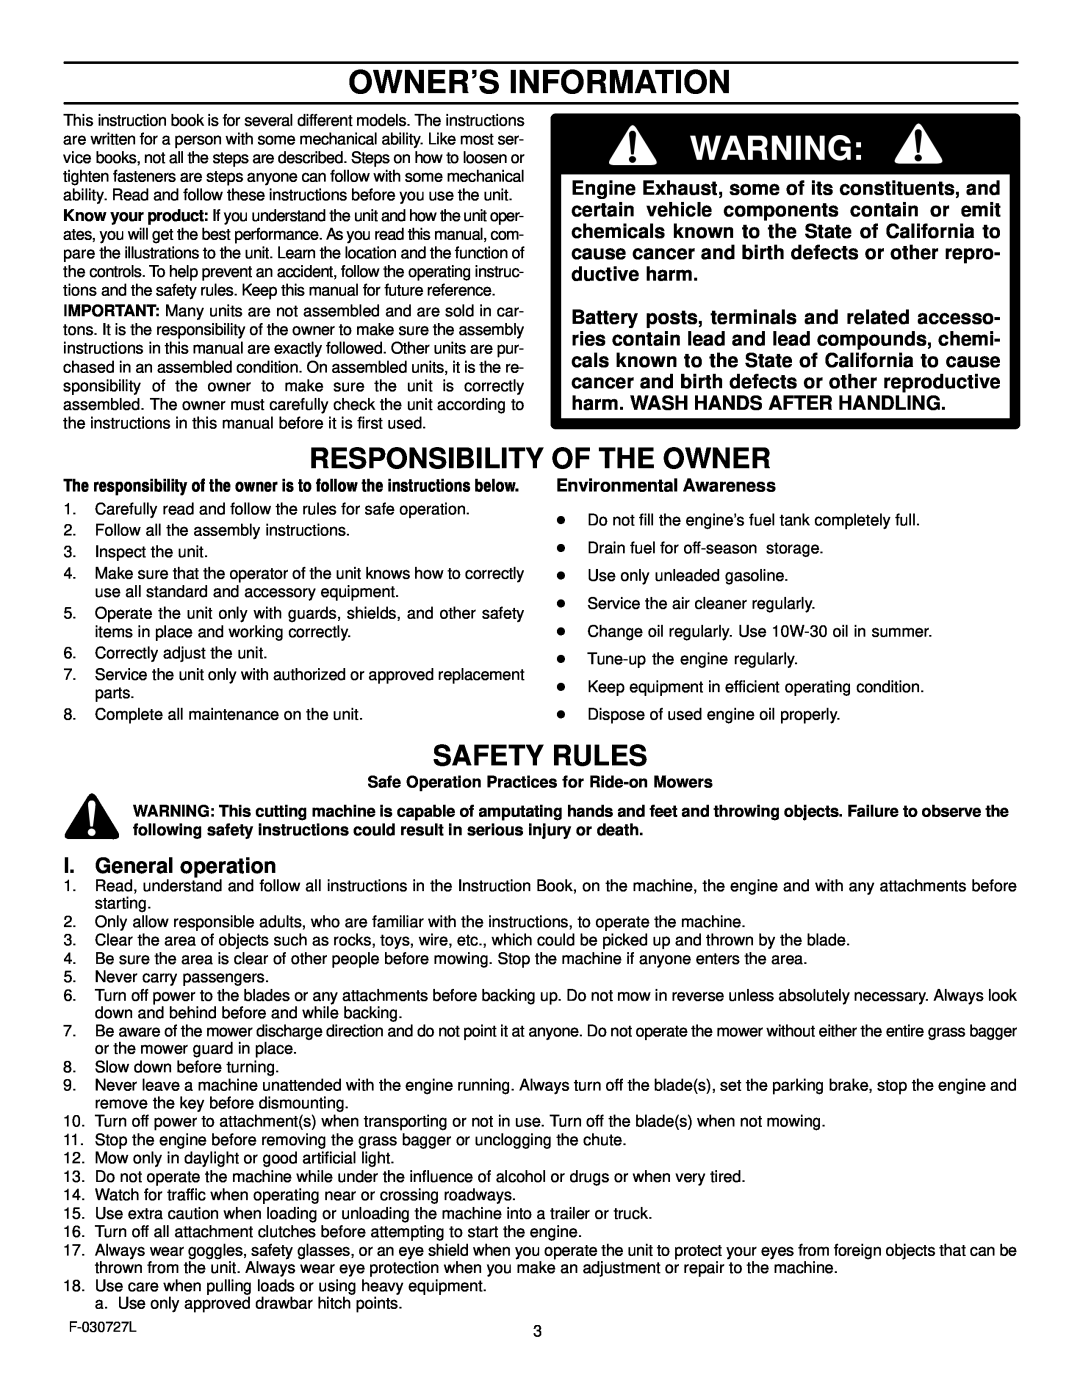 Murray 465600x8A manual Owner’S Information, Responsibility Of The Owner, Safety Rules, I. General operation 